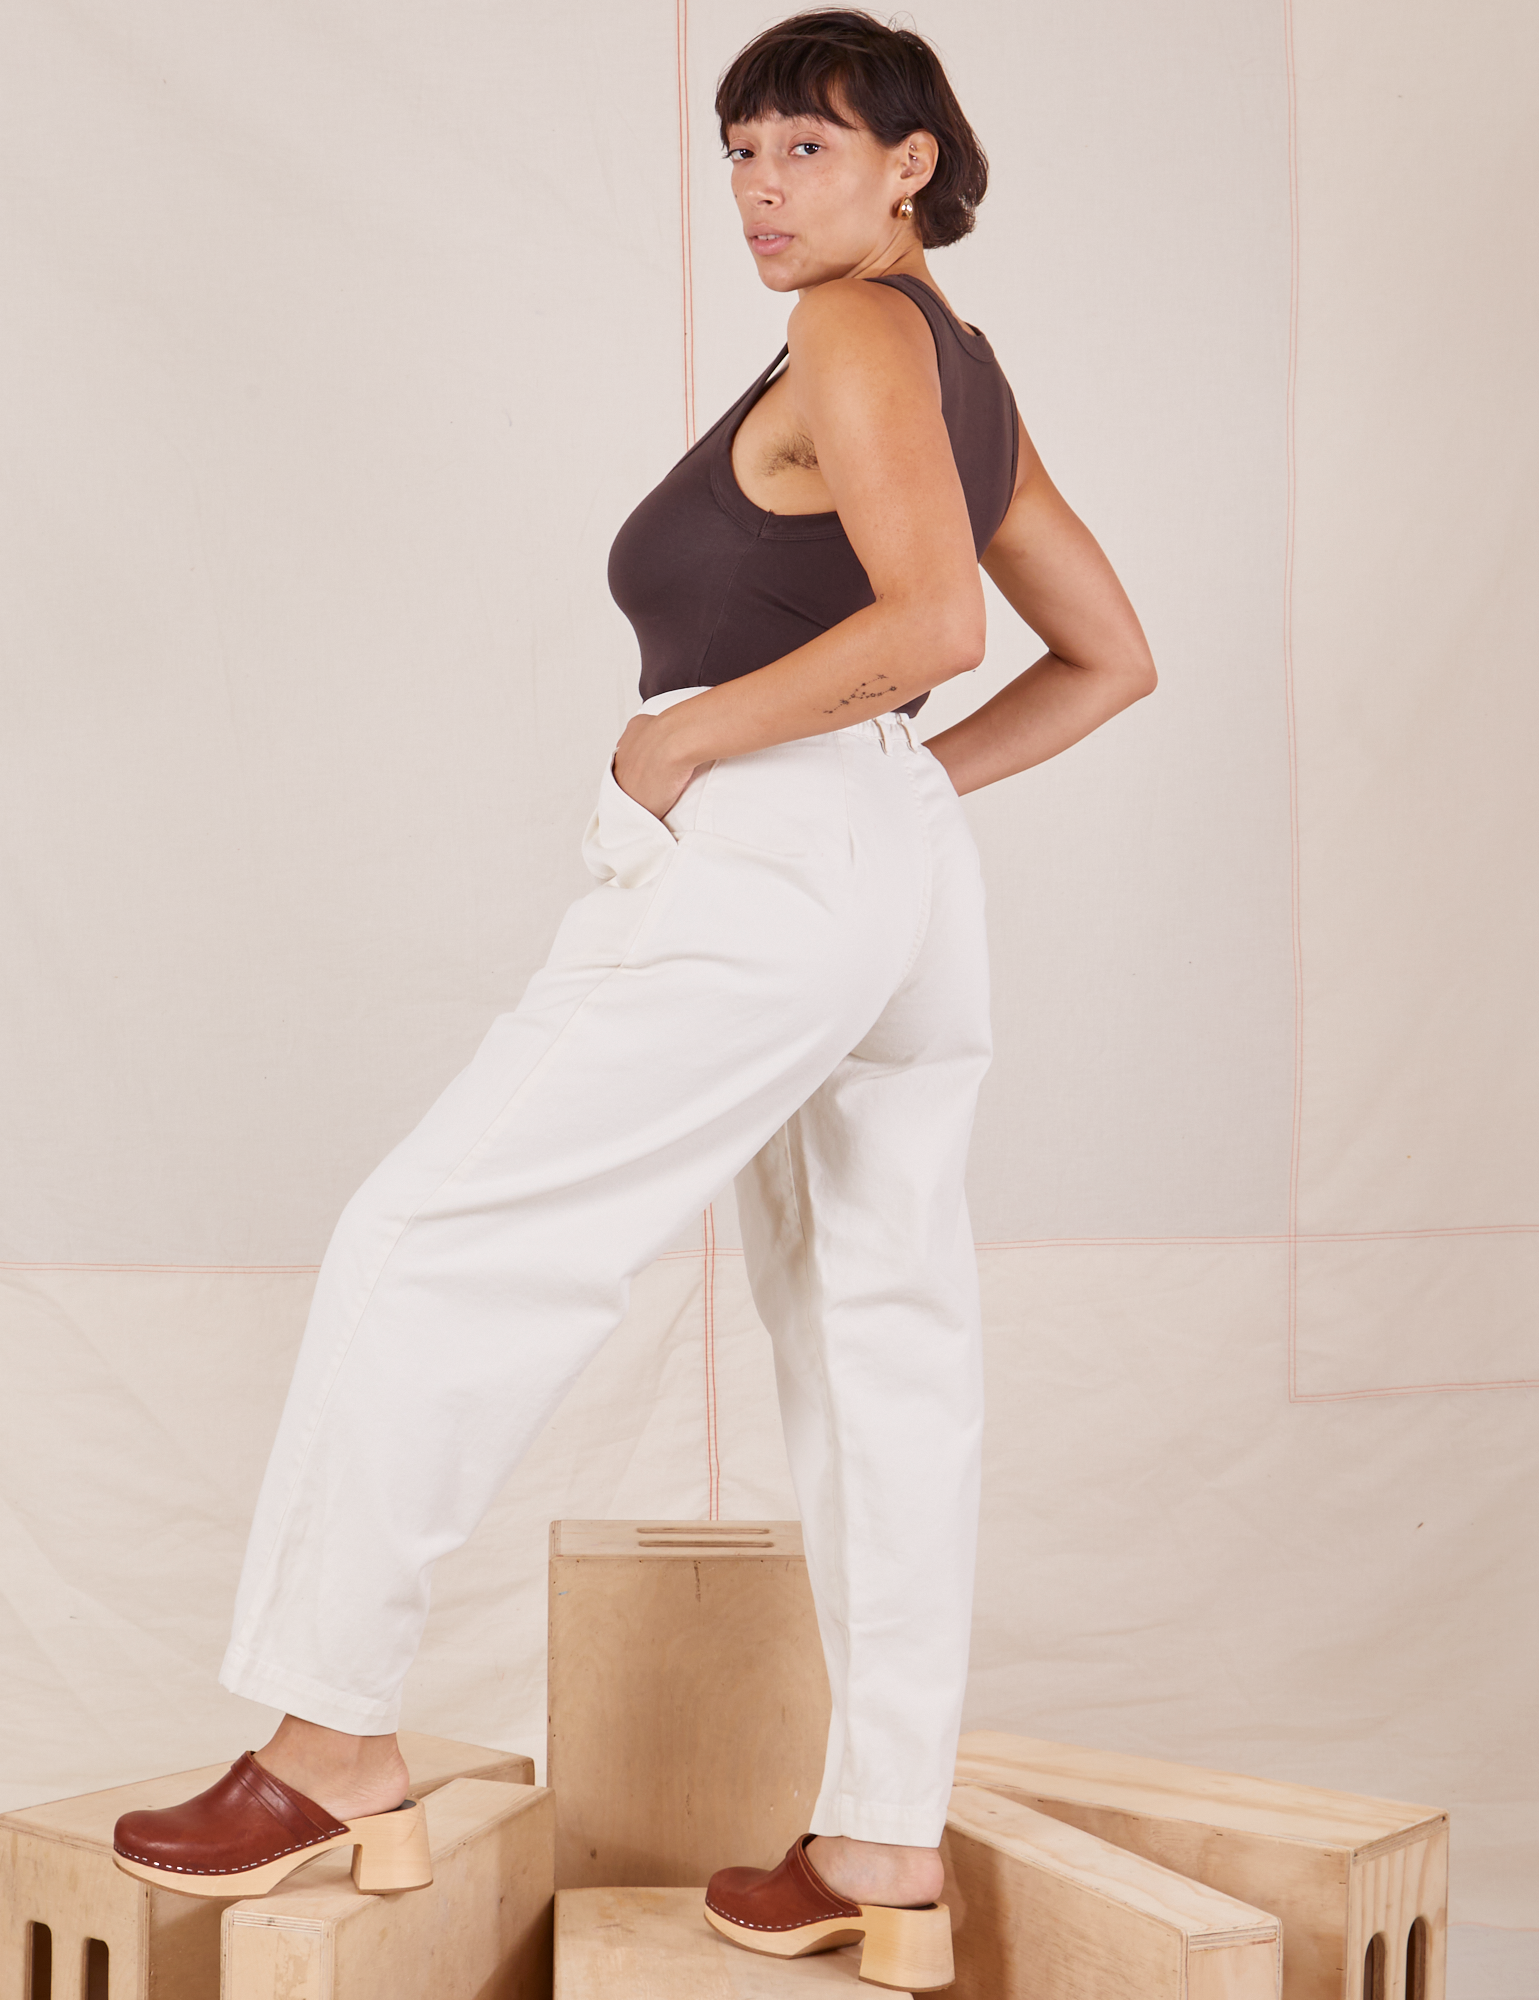 Side view of Heavyweight Trousers in Vintage Tee Off-White and espresso brown Cropped Tank Top worn by Tiara.